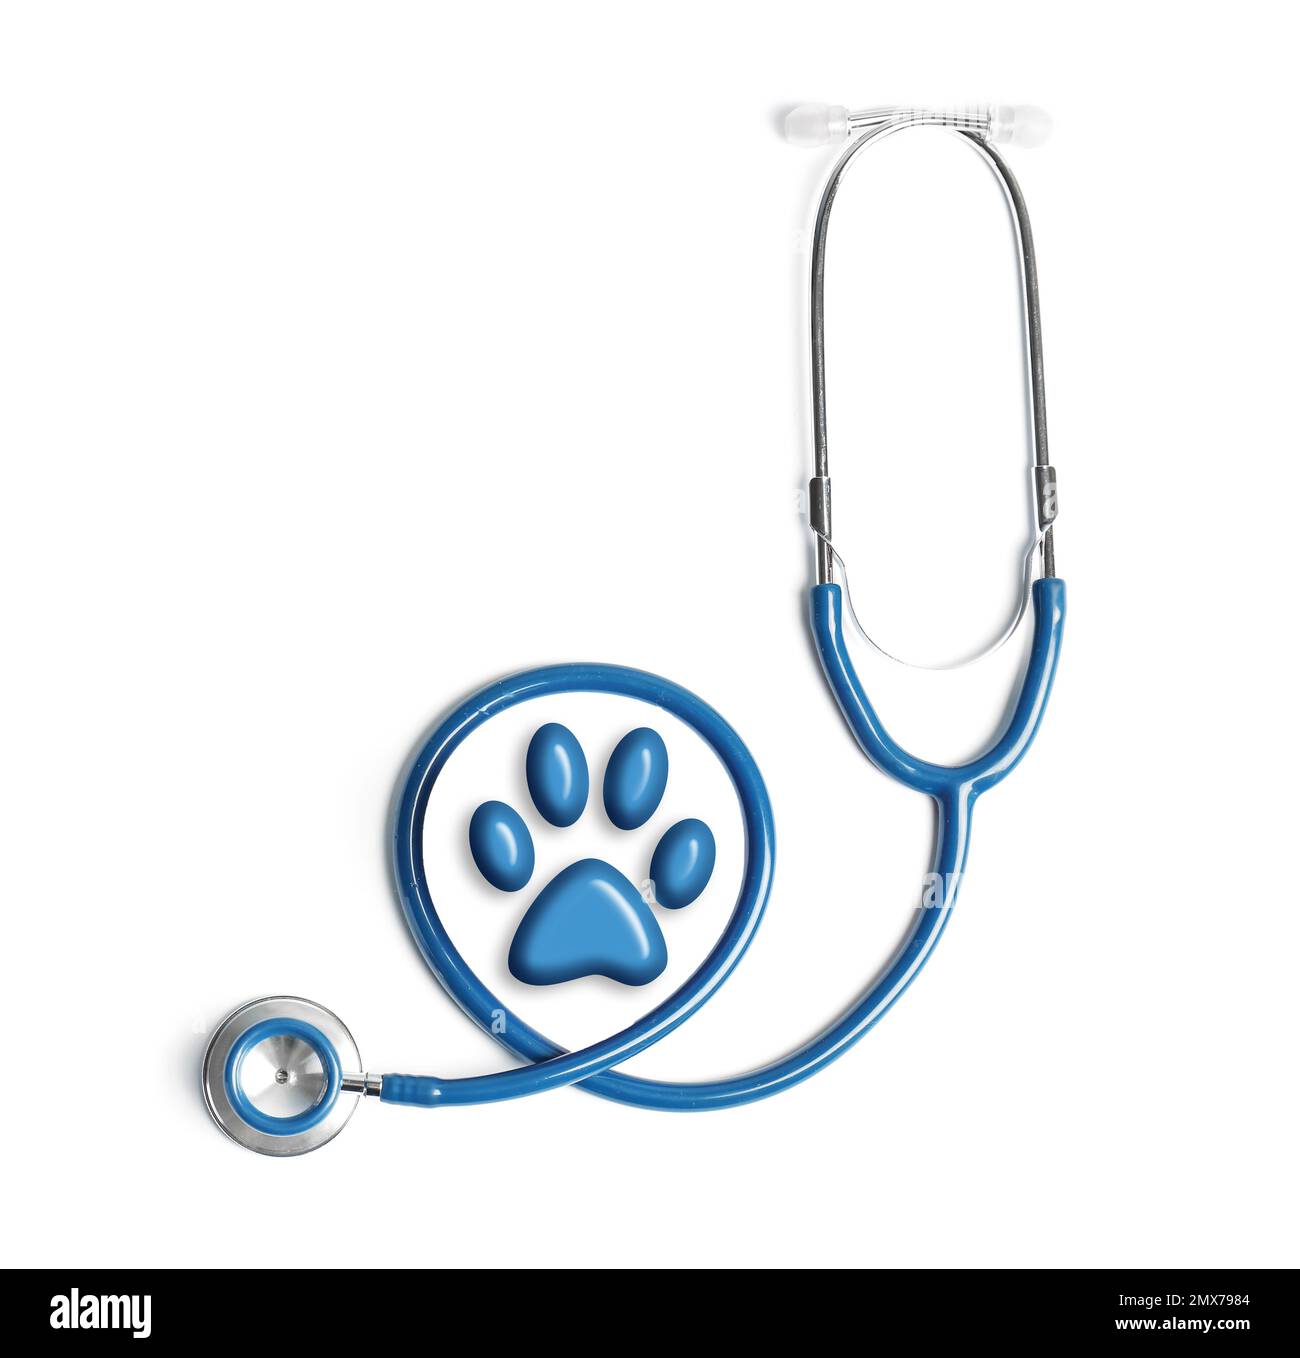 Stethoscope and animal paw on white background, top view Stock Photo